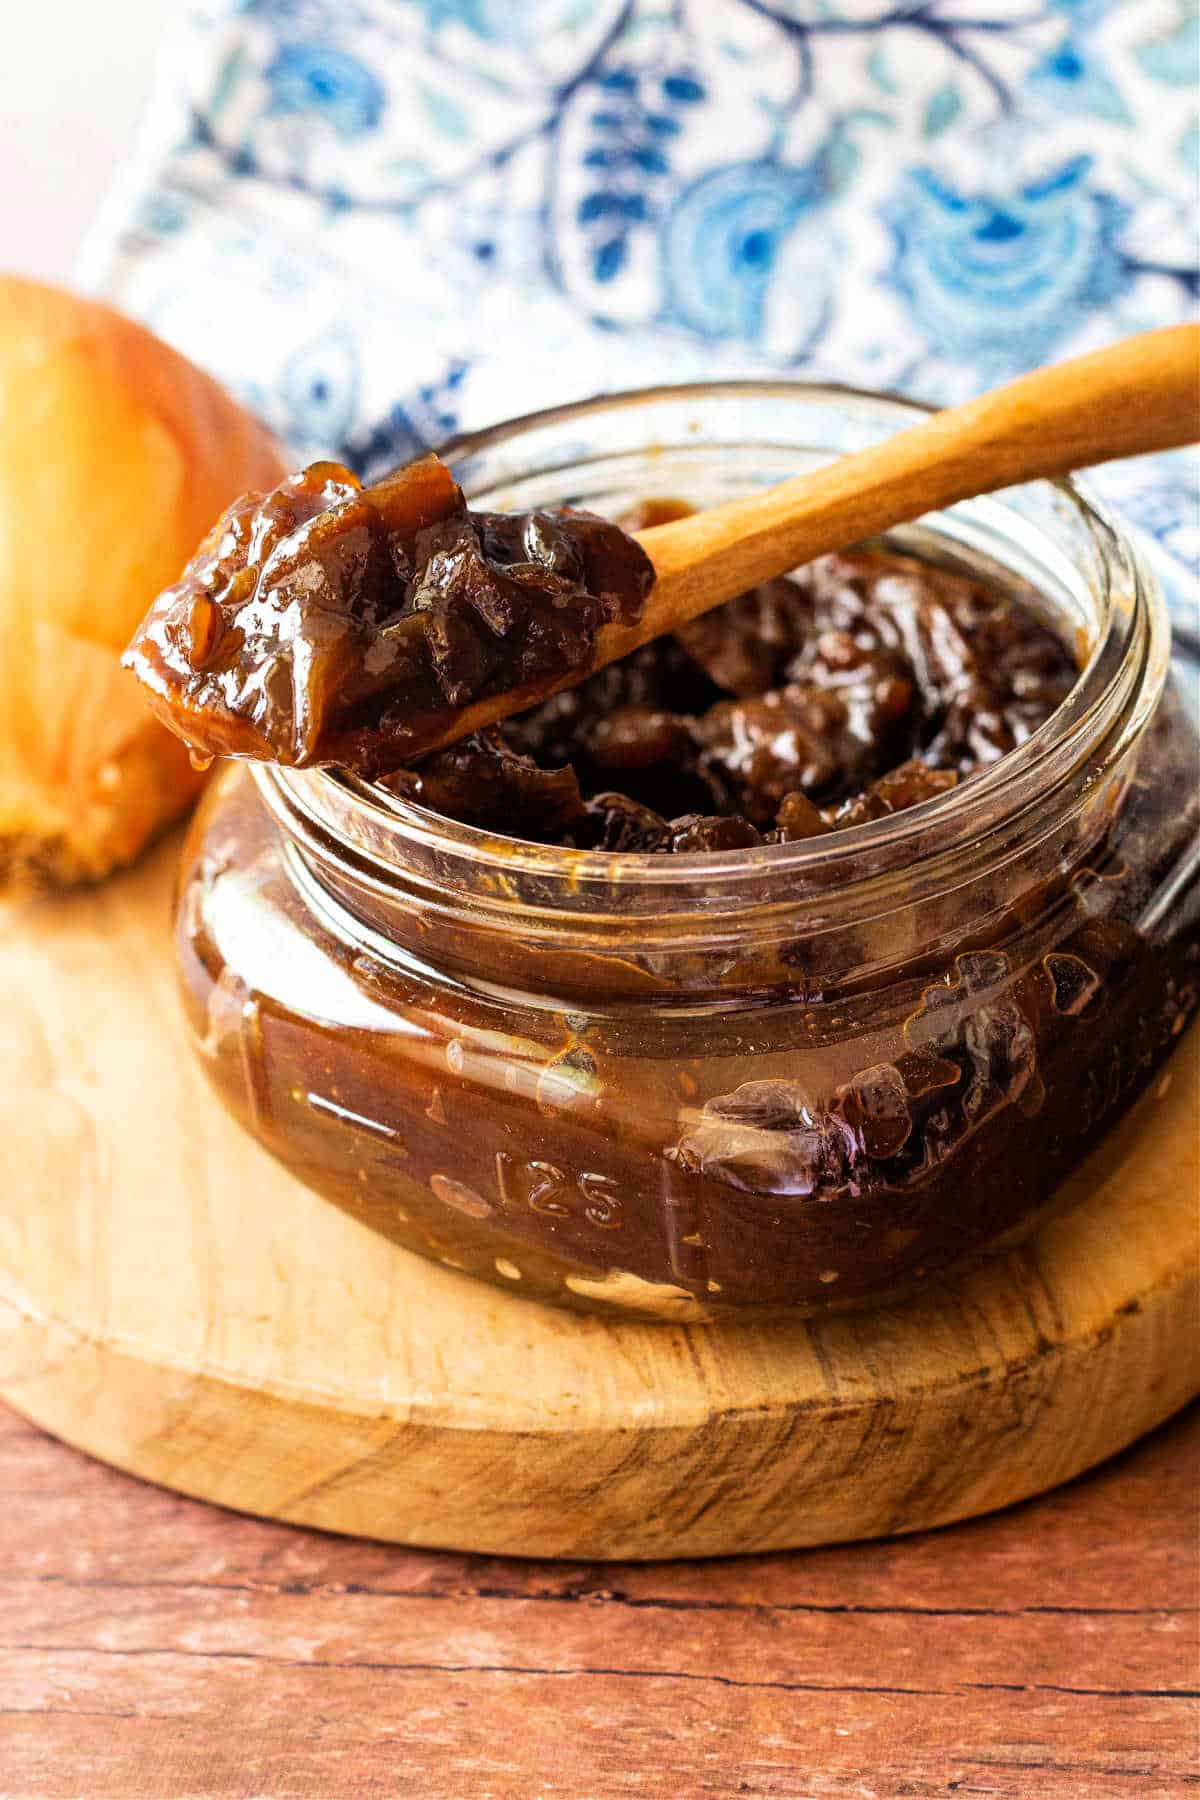 A glass jar containing onion jam iwth a wooden spoon in it.